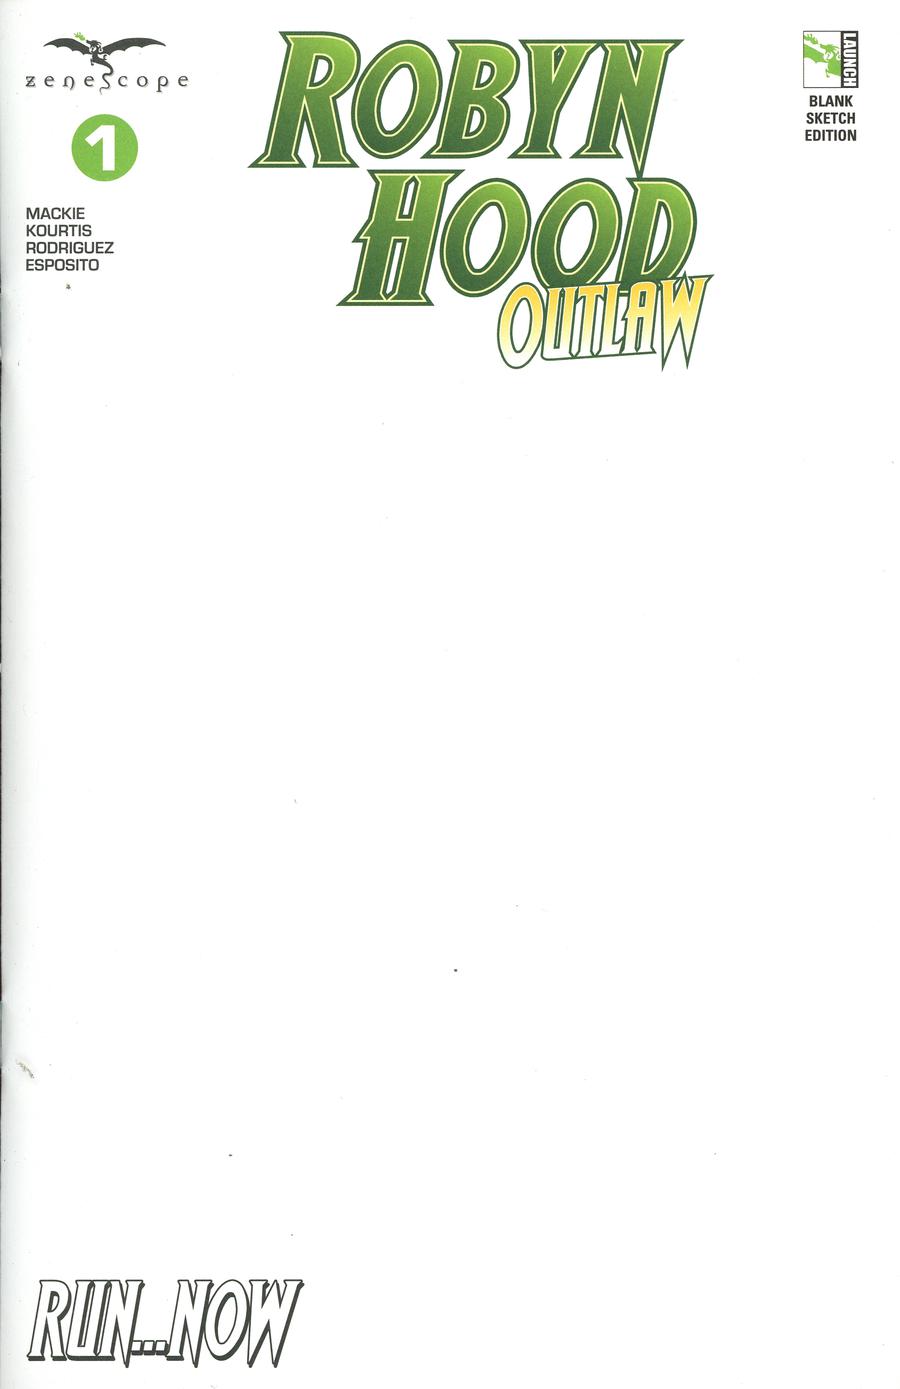 Grimm Fairy Tales Presents Robyn Hood Outlaw #1 Cover F Blank